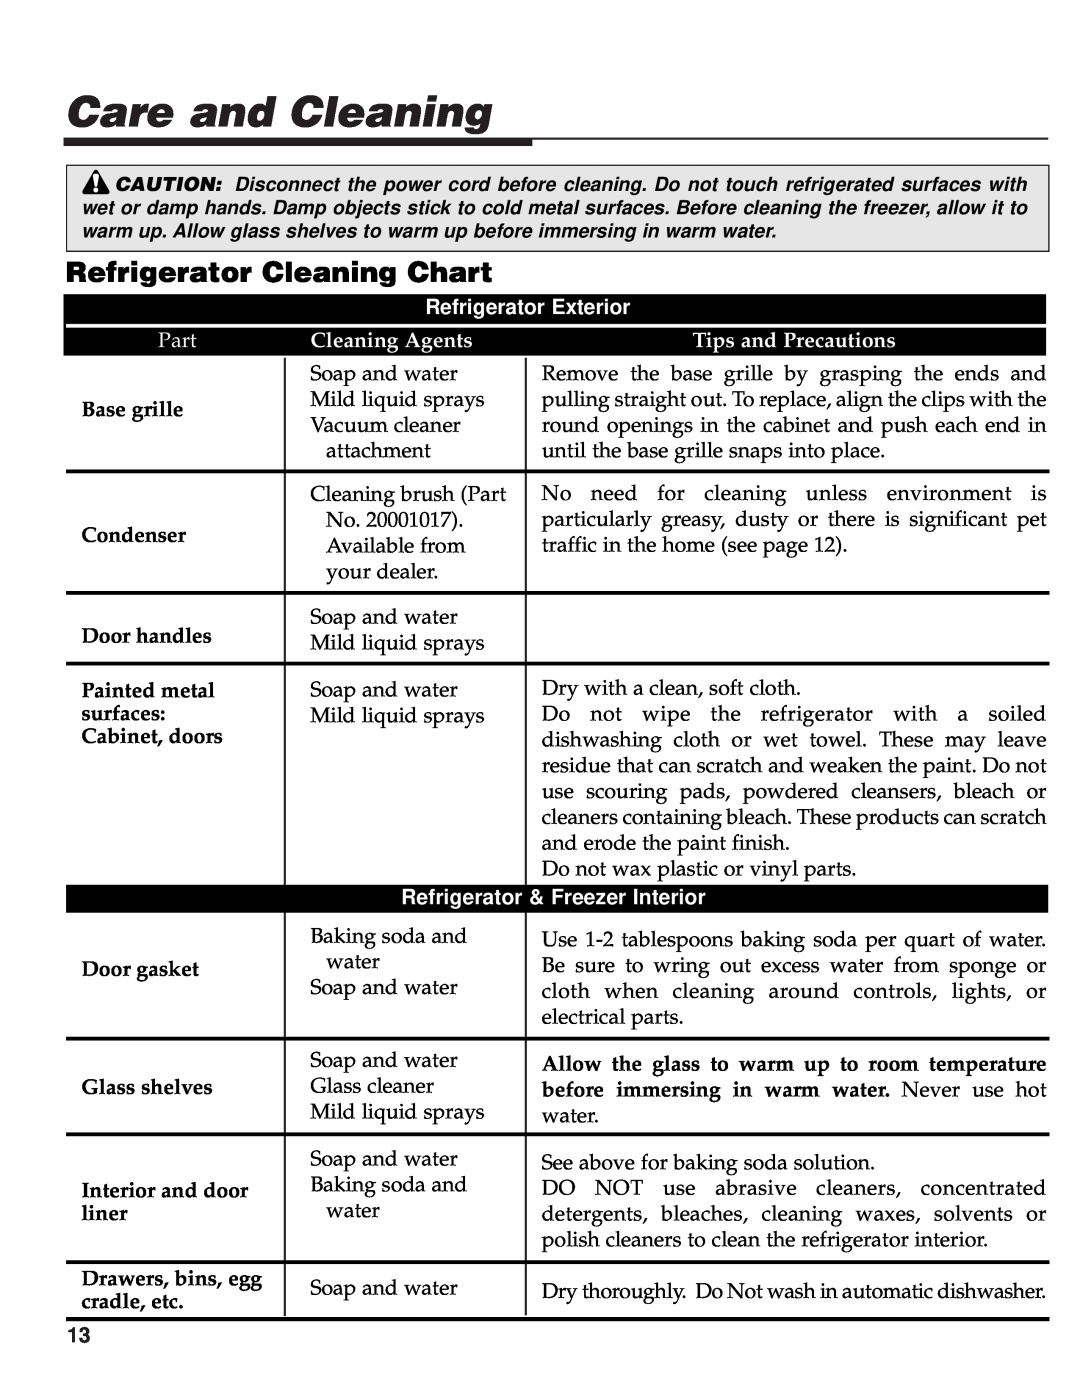 Maytag 61005299 warranty Care and Cleaning, Refrigerator Cleaning Chart, Refrigerator Exterior, Part, Cleaning Agents 